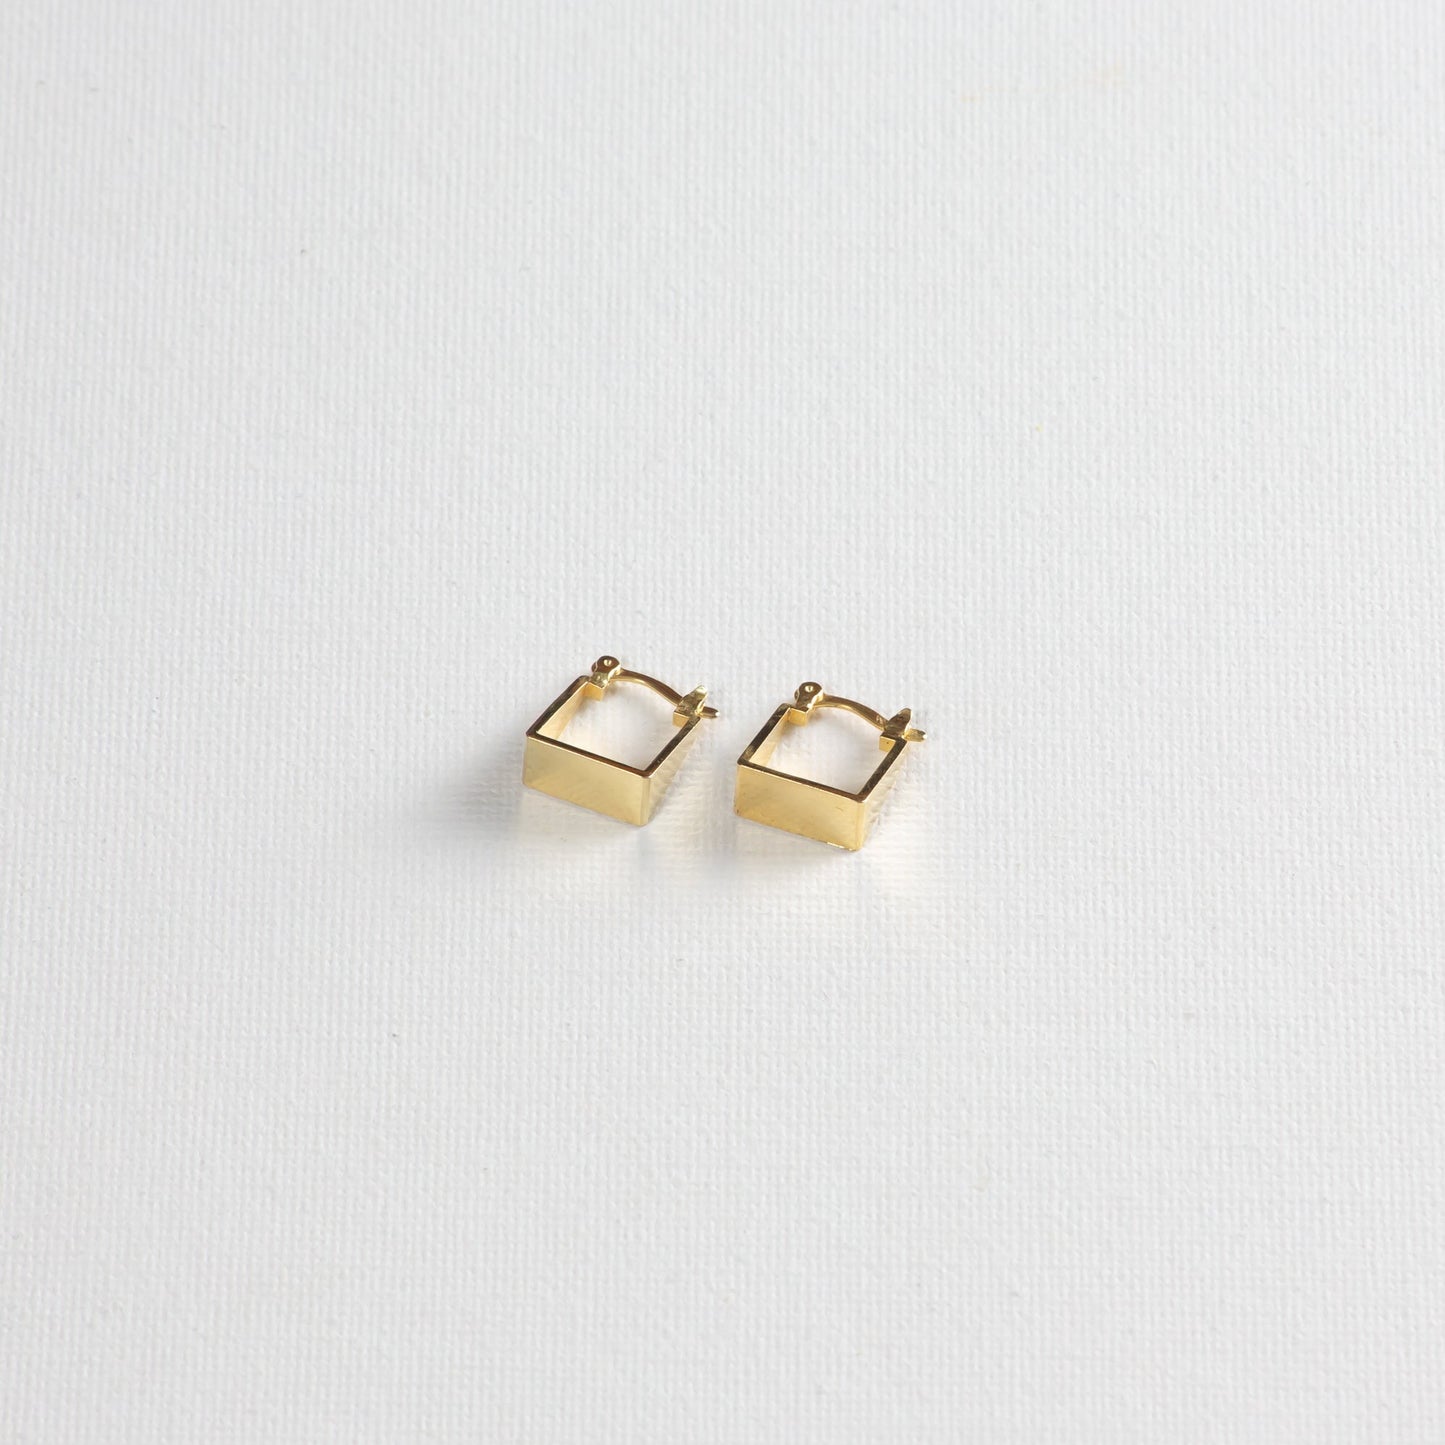 The gold square hoops are photographed at a slight angle from the bottom on a white background. The earrings are carefully positioned, showcasing the corners and edges of the design.